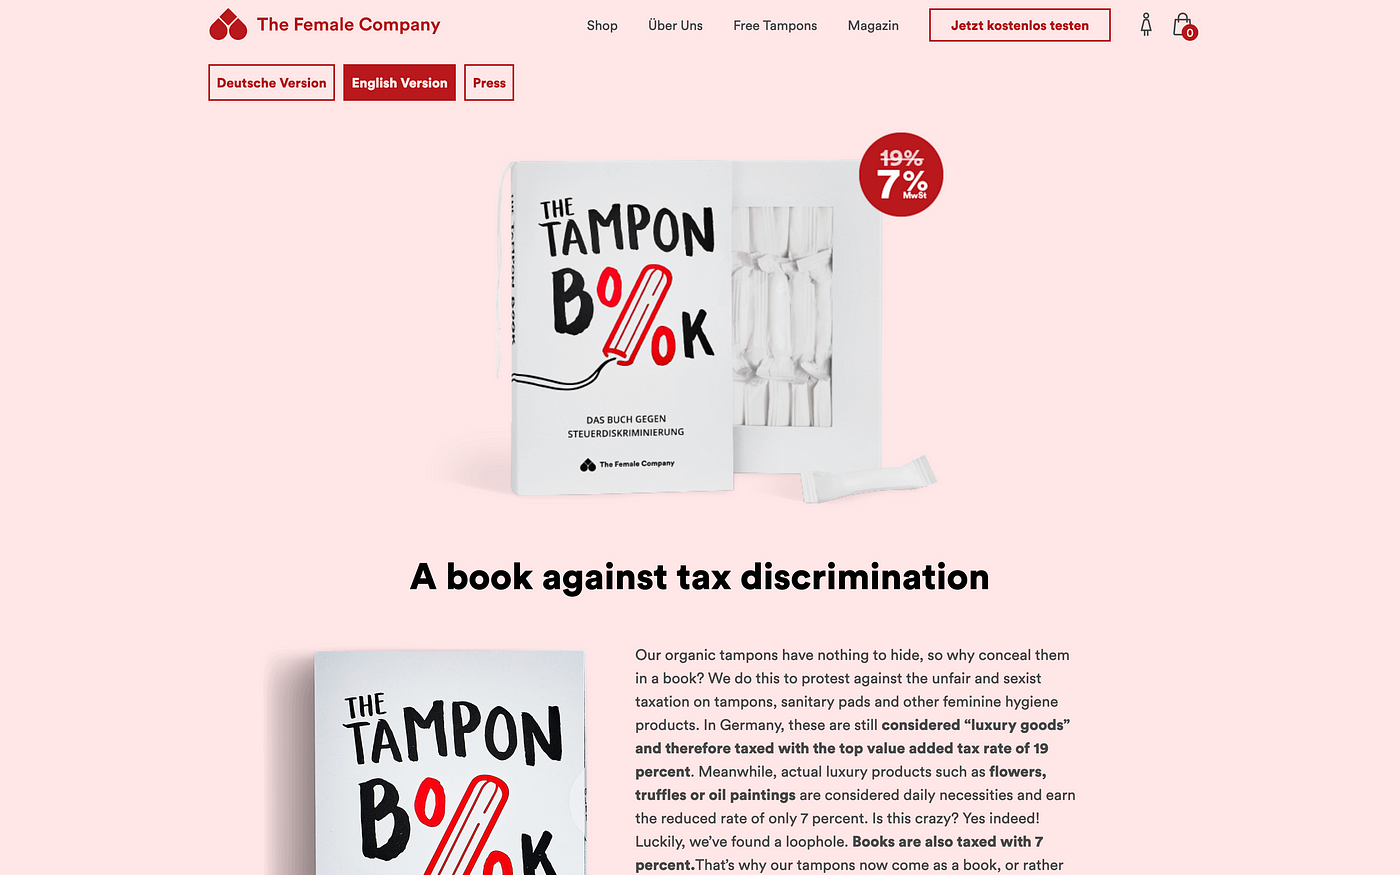 How design makes you read tampons and drink diarrhea | by Jan Van Caneghem  | UX Collective